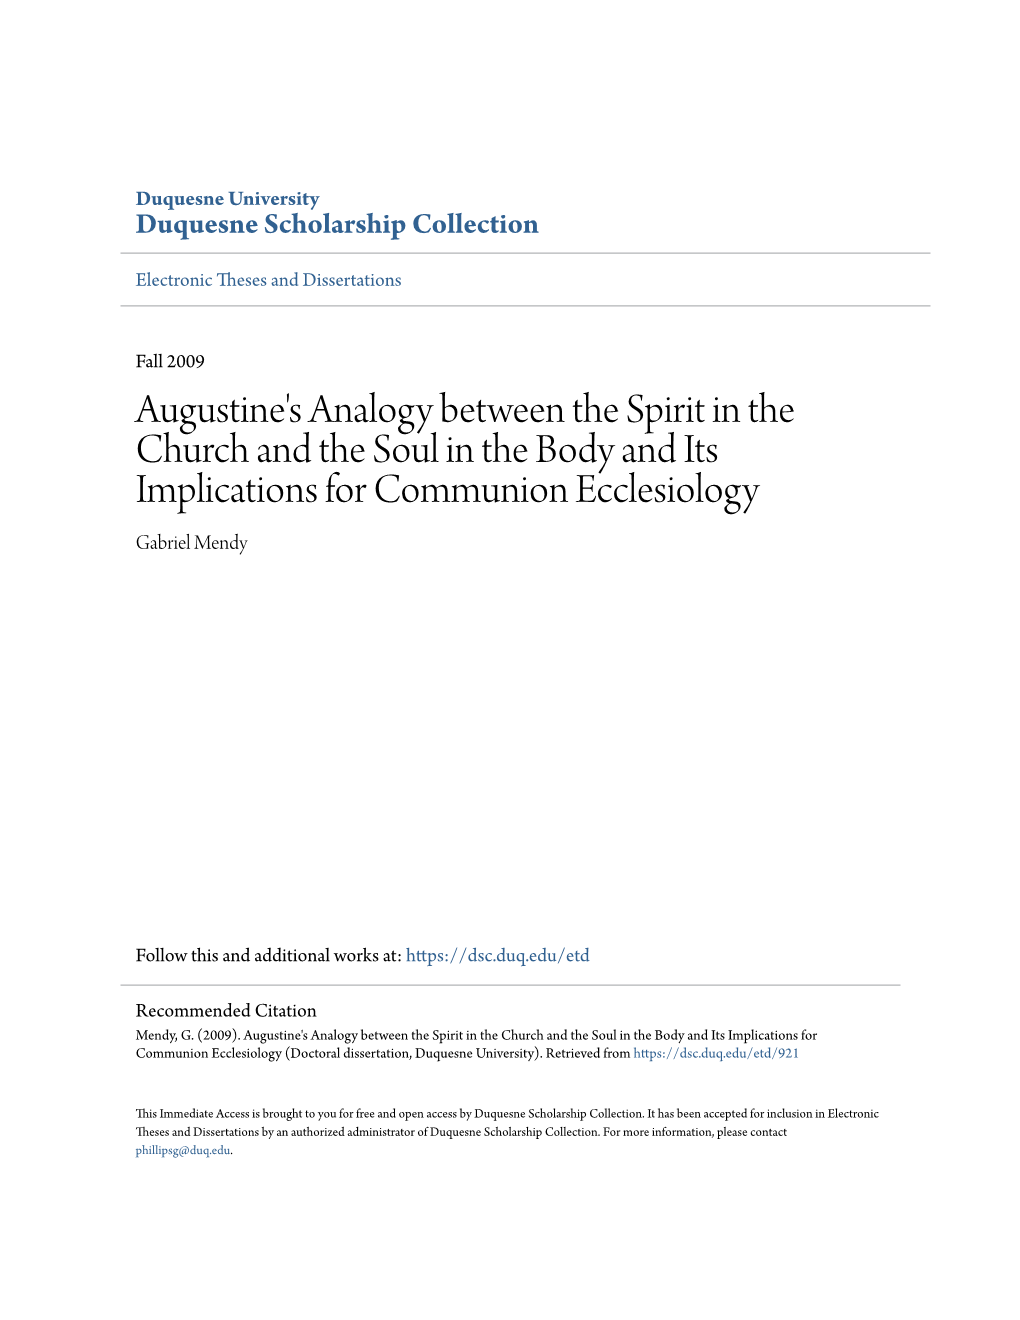 Augustine's Analogy Between the Spirit in the Church and the Soul in the Body and Its Implications for Communion Ecclesiology Gabriel Mendy